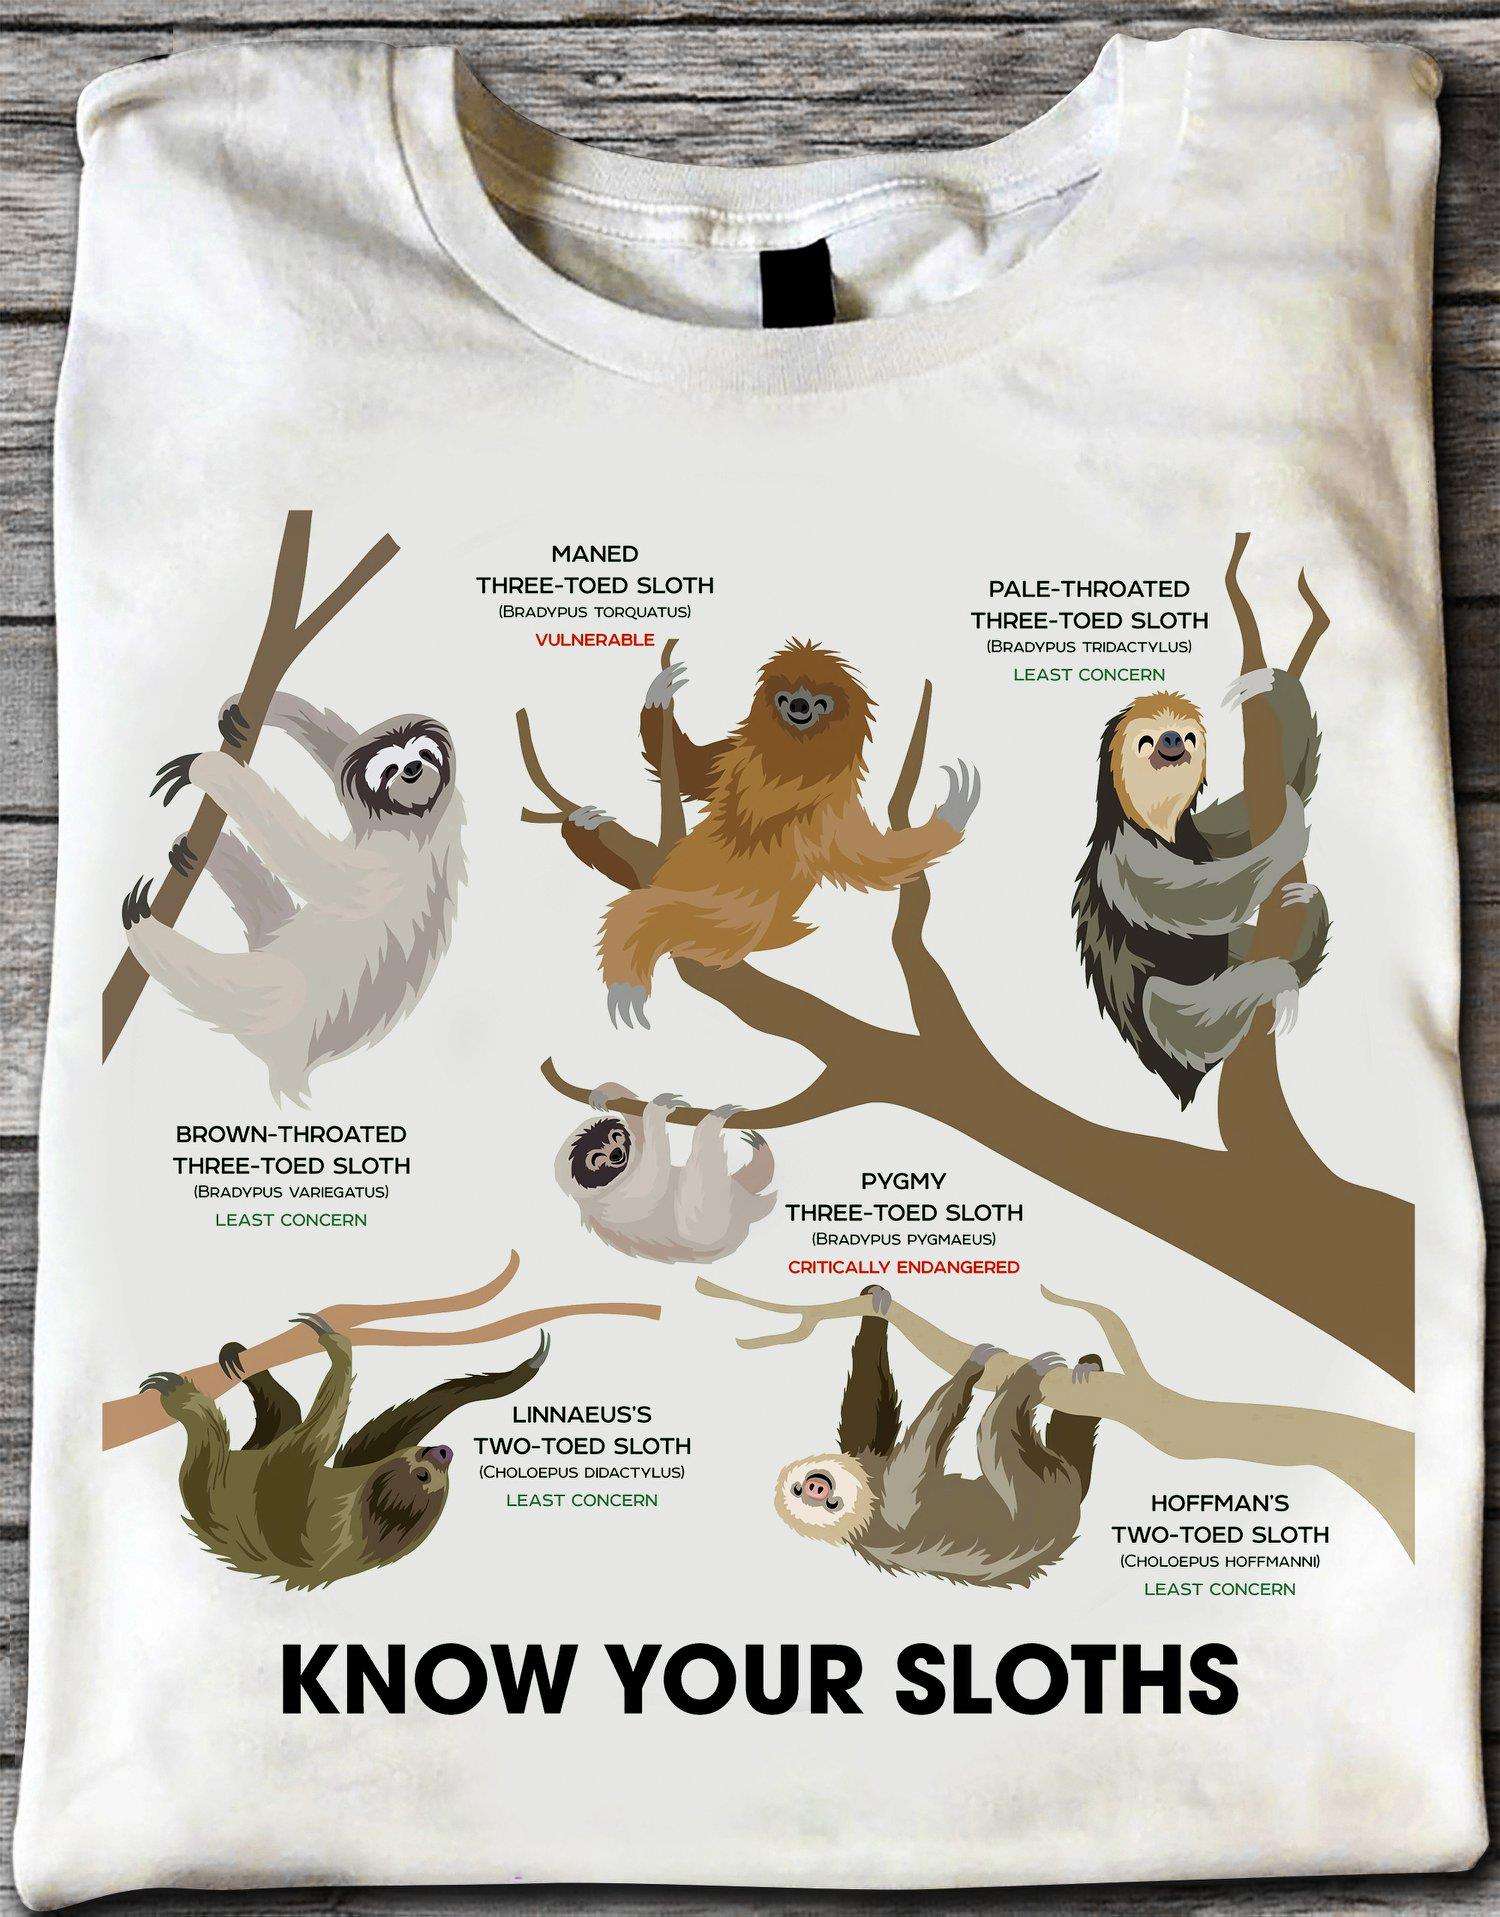 Funny Sloth, Know Your Sloth - Maned three-toed sloth, Pale-throated three-toed sloth, brown-throated three-toed sloth